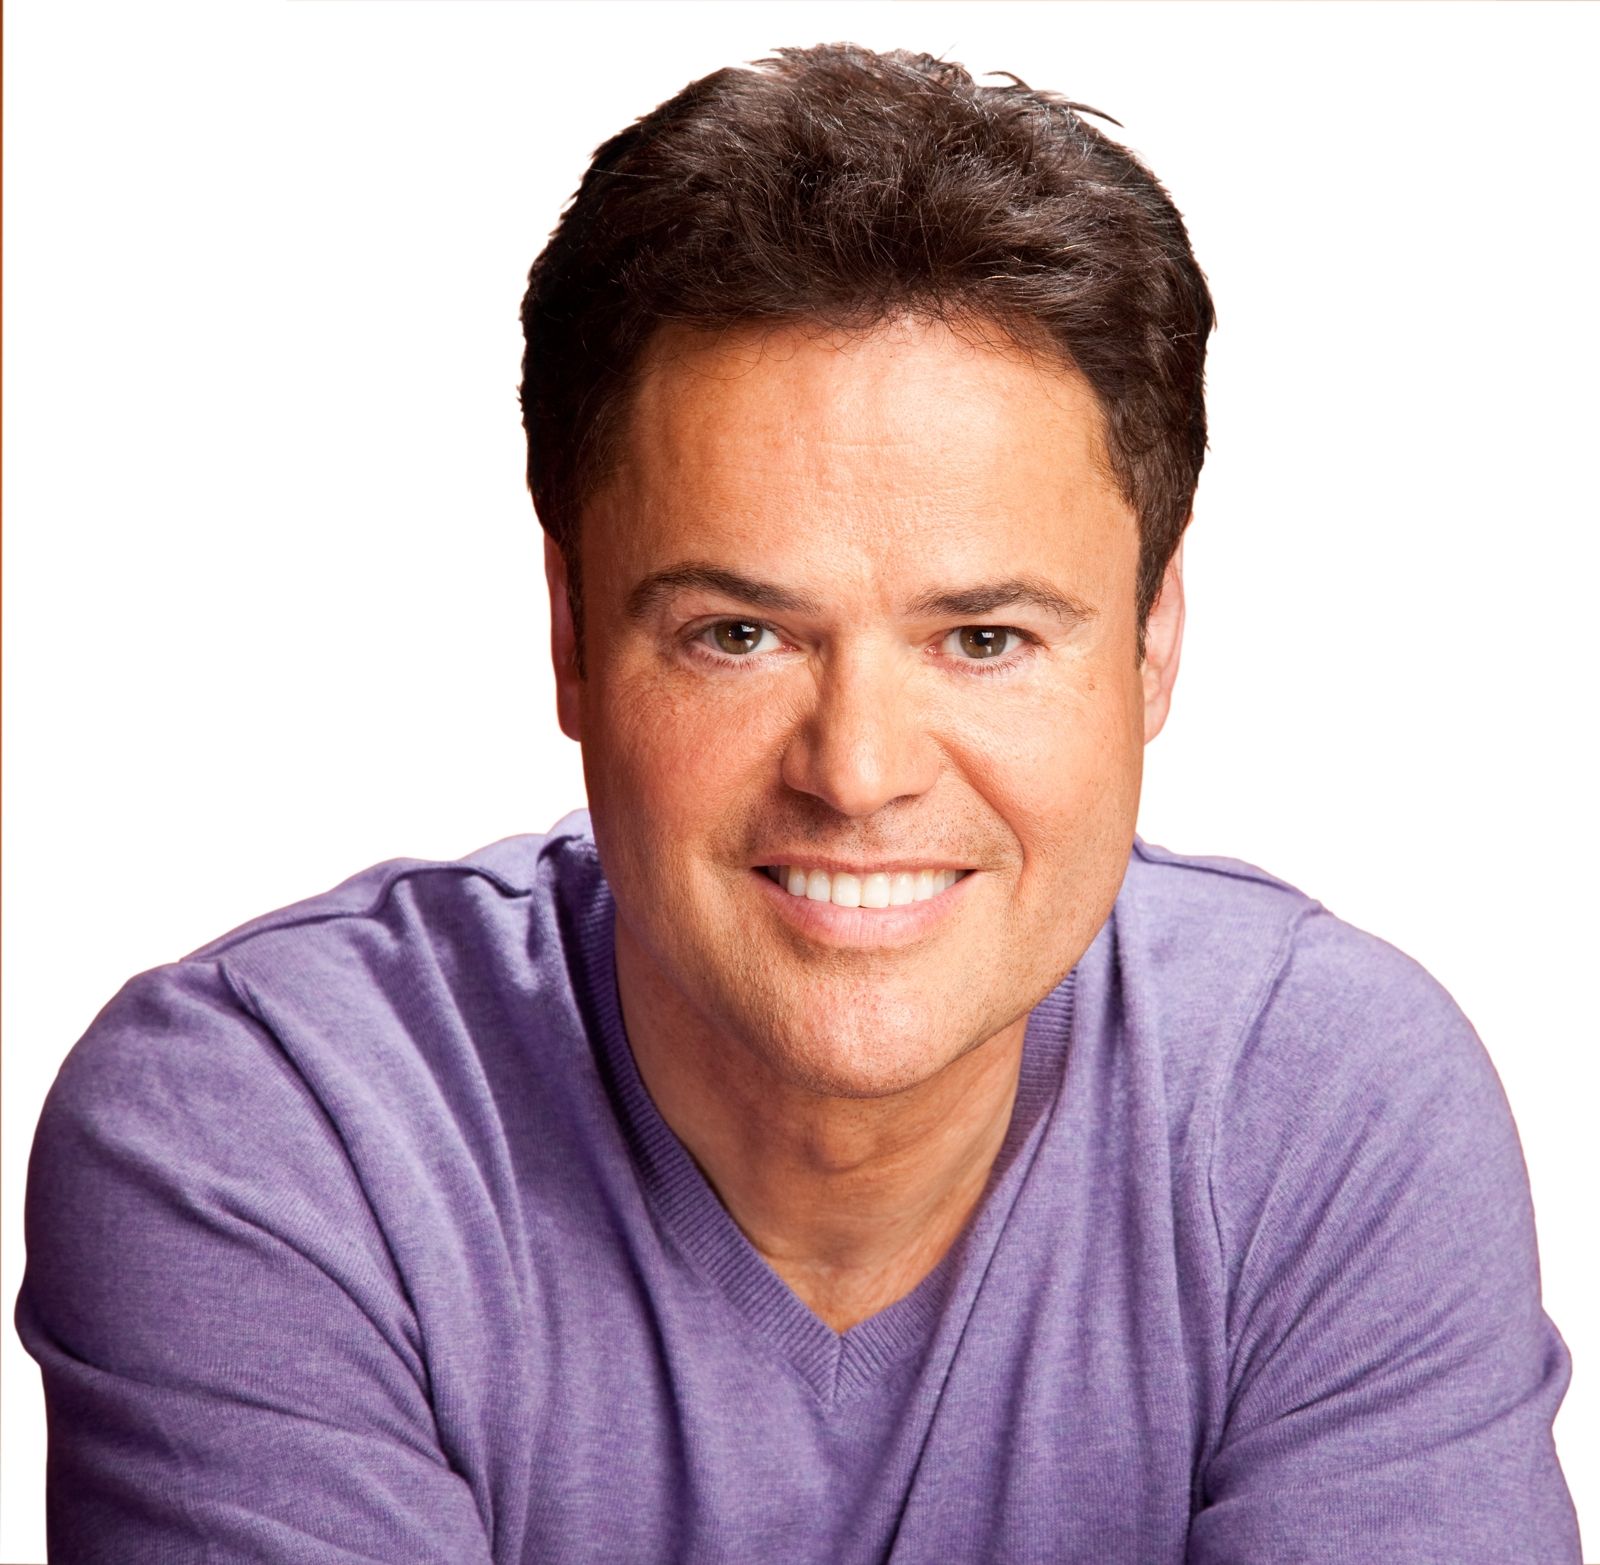 Donny Osmond joins The Breeze - listen to the interview.